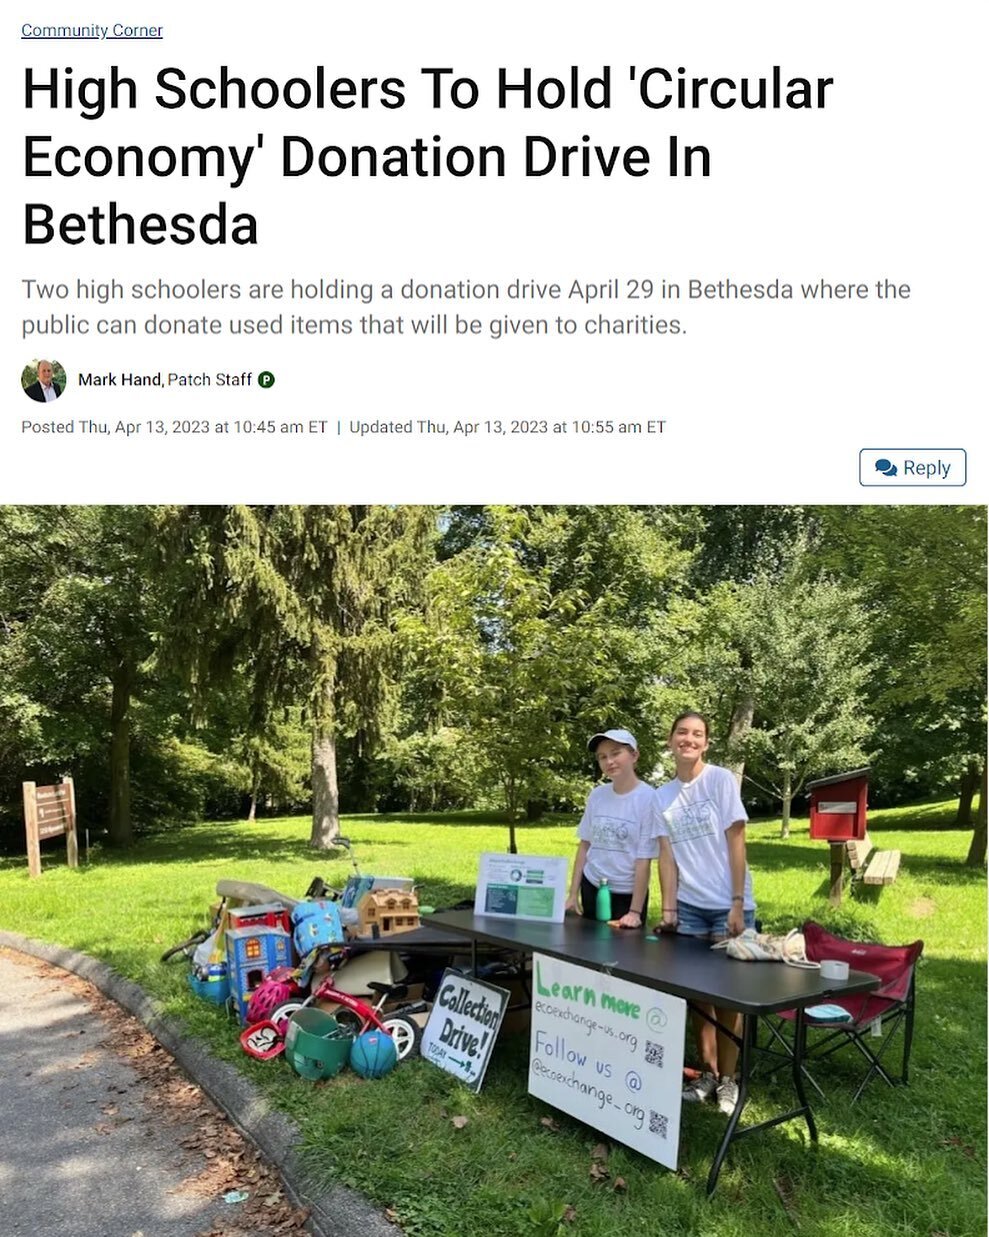 EcoExchange was recently featured in an article by Patch! 😊 Check it out! ➡️ https://patch.com/maryland/bethesda-chevychase/high-schoolers-hold-circular-economy-donation-drive-bethesda